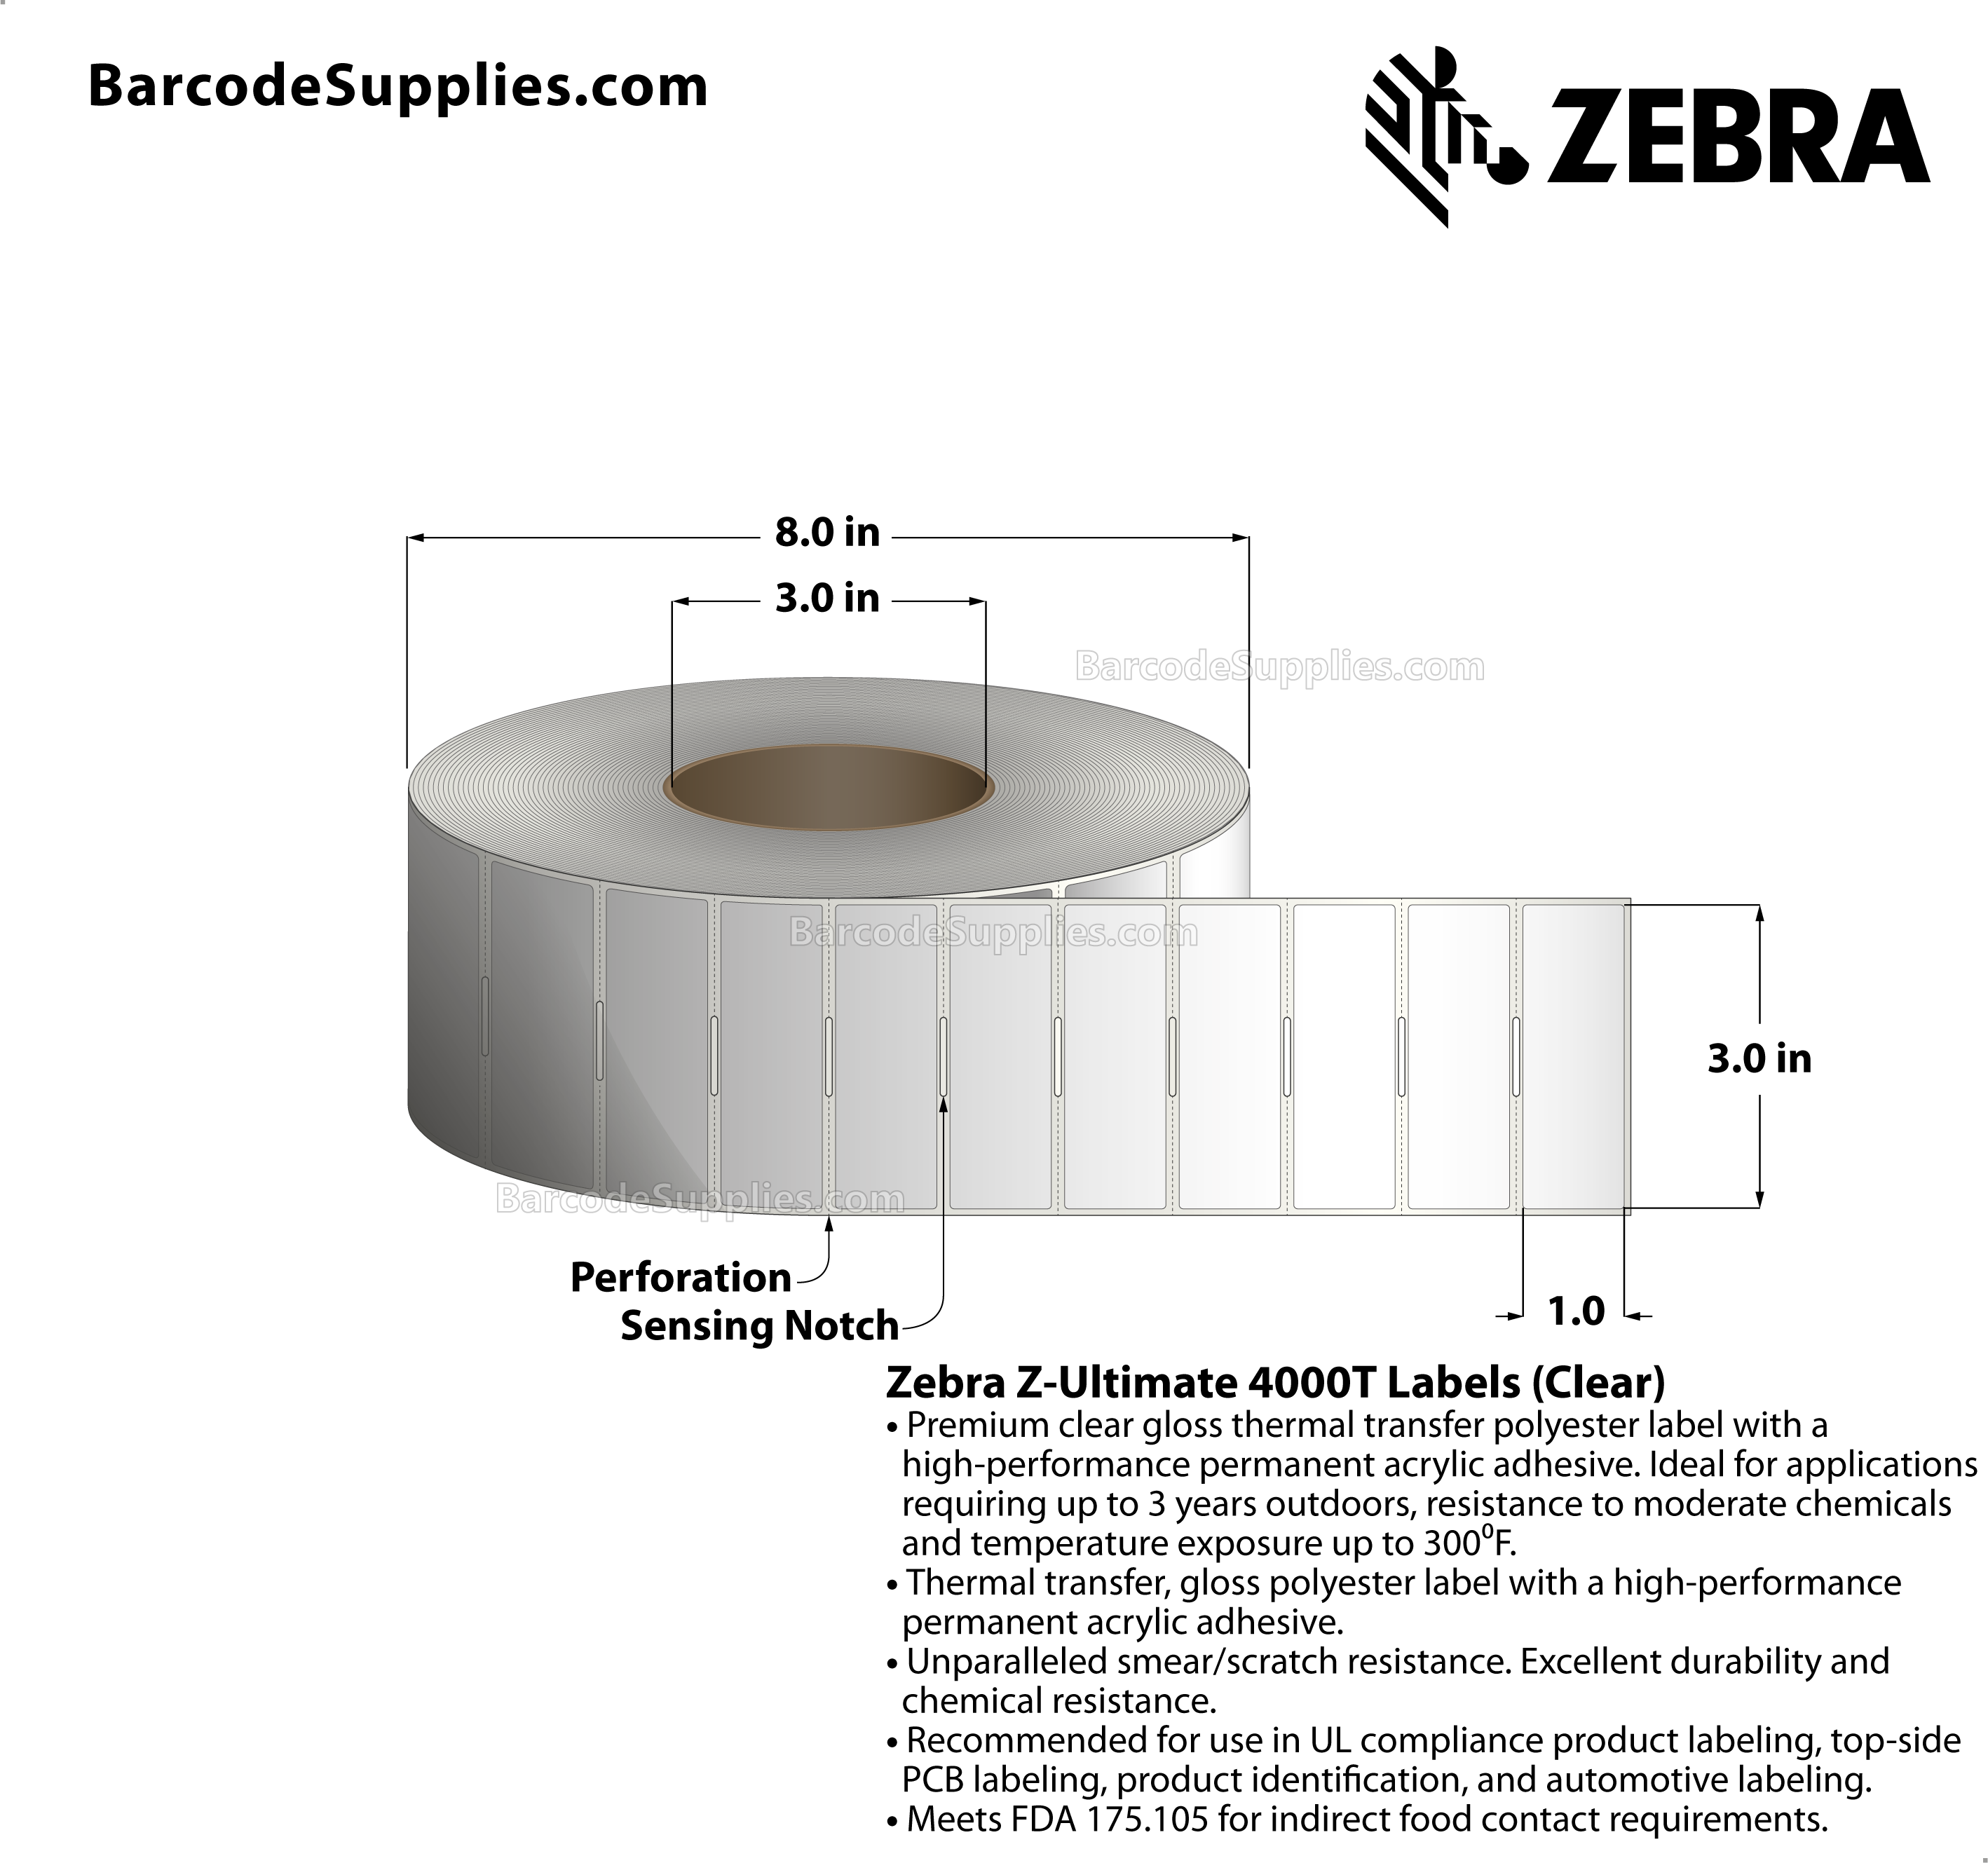 3 x 1 Thermal Transfer Clear Z-Ultimate 4000T Clear Labels With Permanent Adhesive - Notch sensing - Perforated - 3000 Labels Per Roll - Carton Of 1 Rolls - 3000 Labels Total - MPN: 10023047